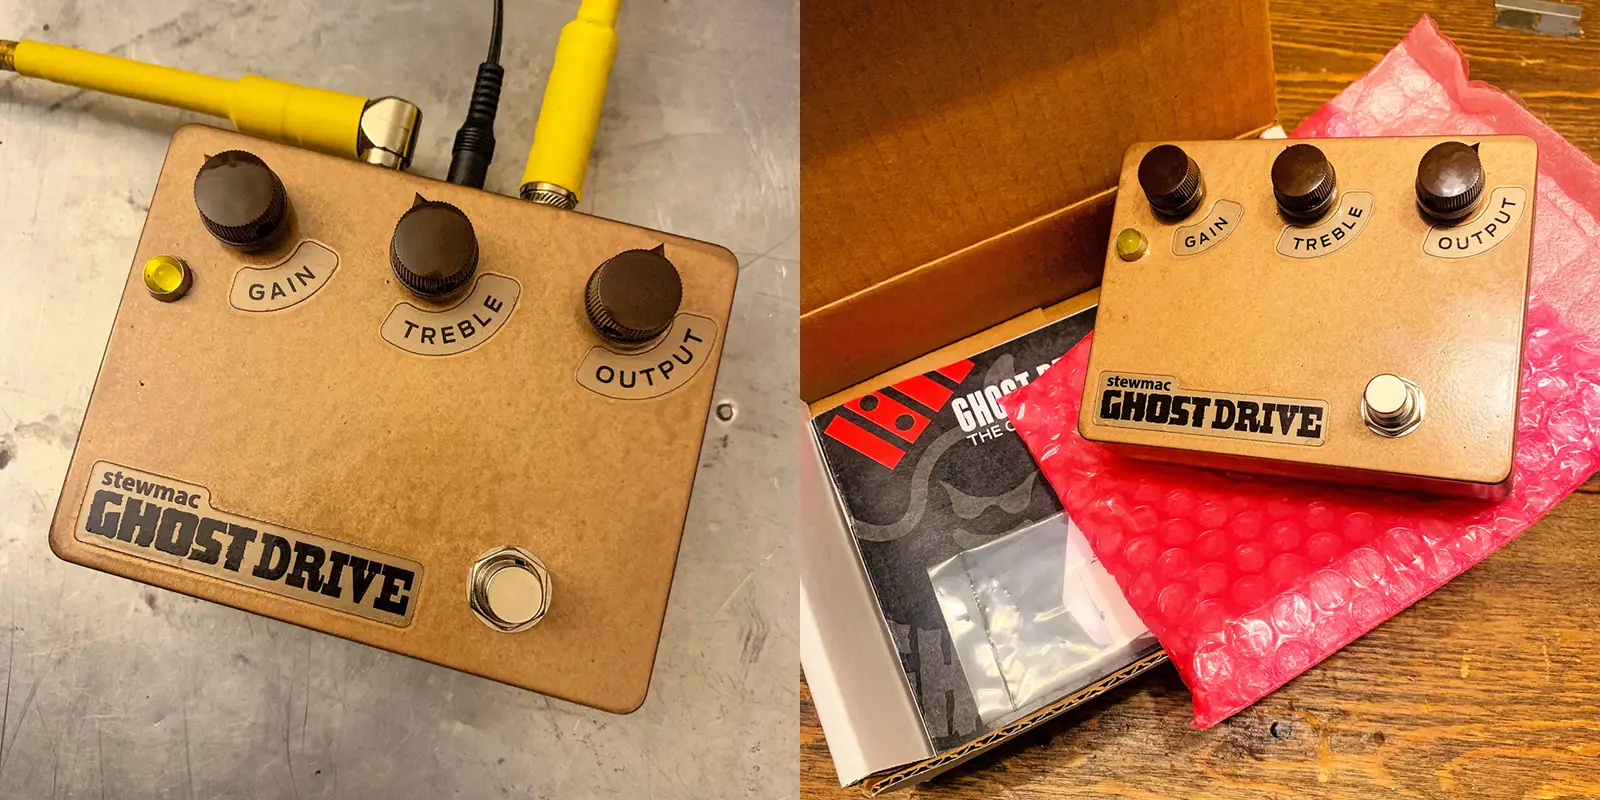 Building StewMac Ghost Drive and 2 Kings Boost Guitar Pedal Kits | SeanRose.com